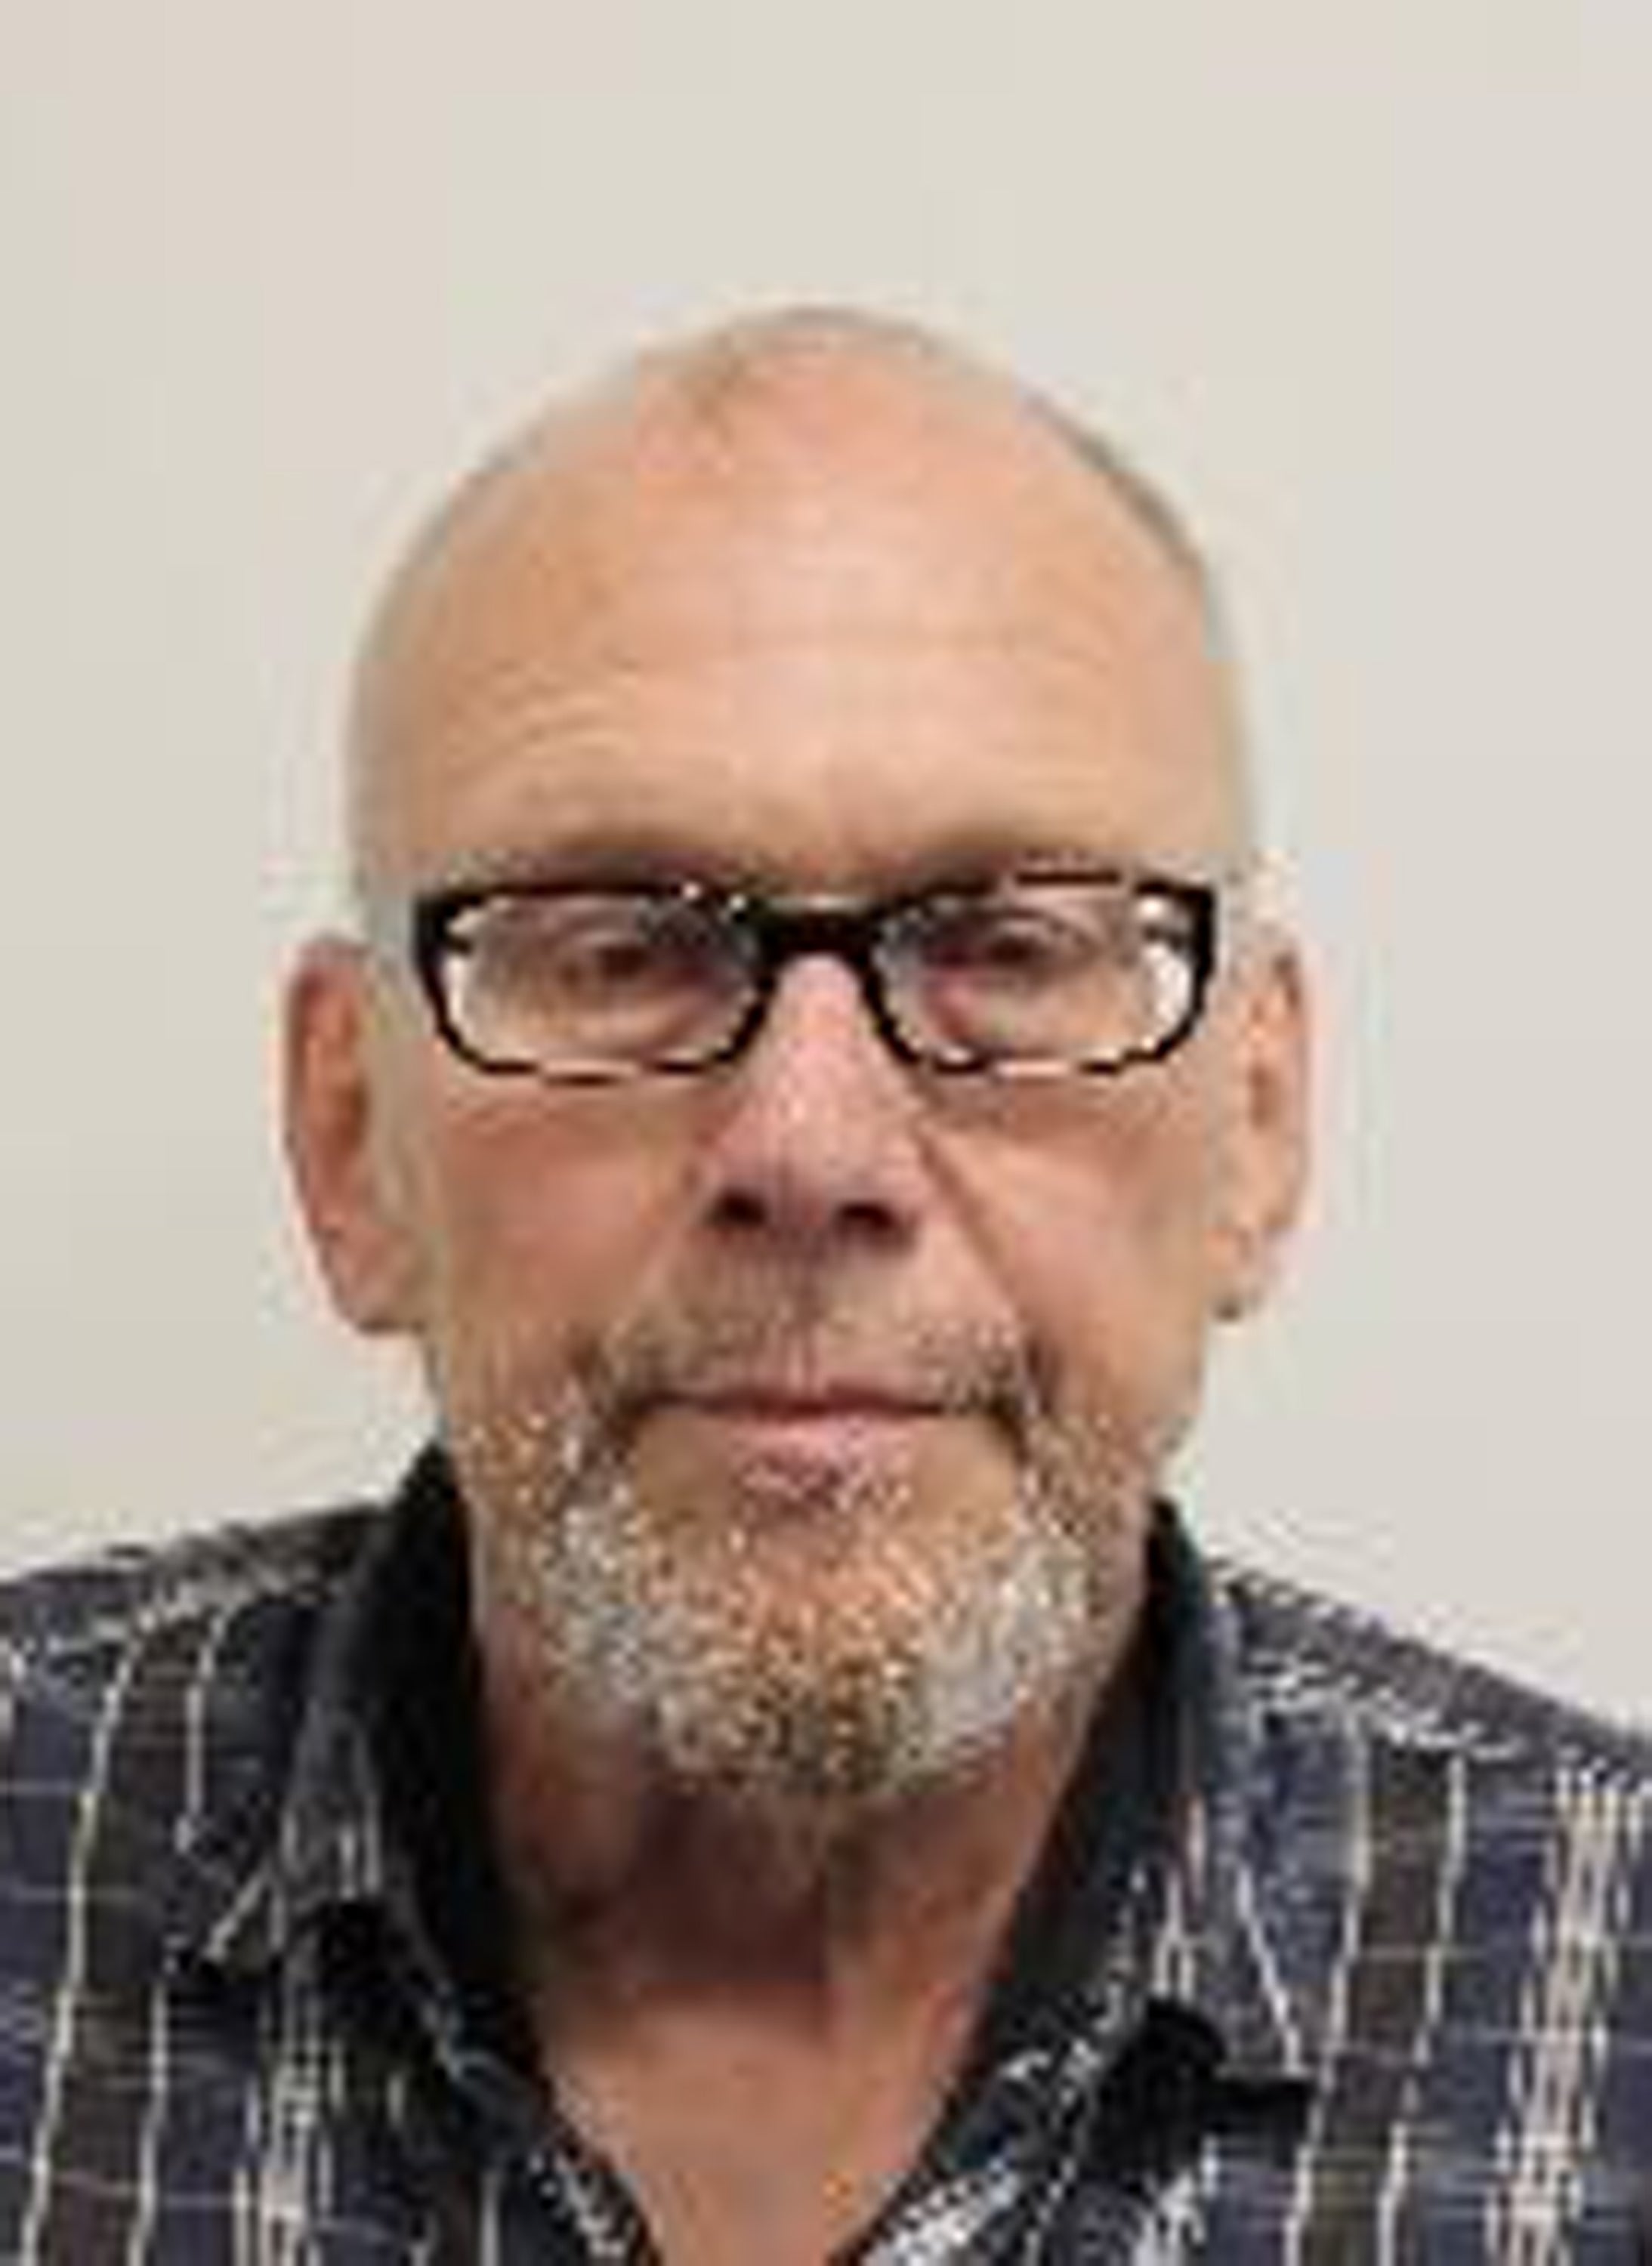 Stefan Scharf, 61, of no fixed address, who was sentenced to four and a half years in jail at the Old Bailey in London